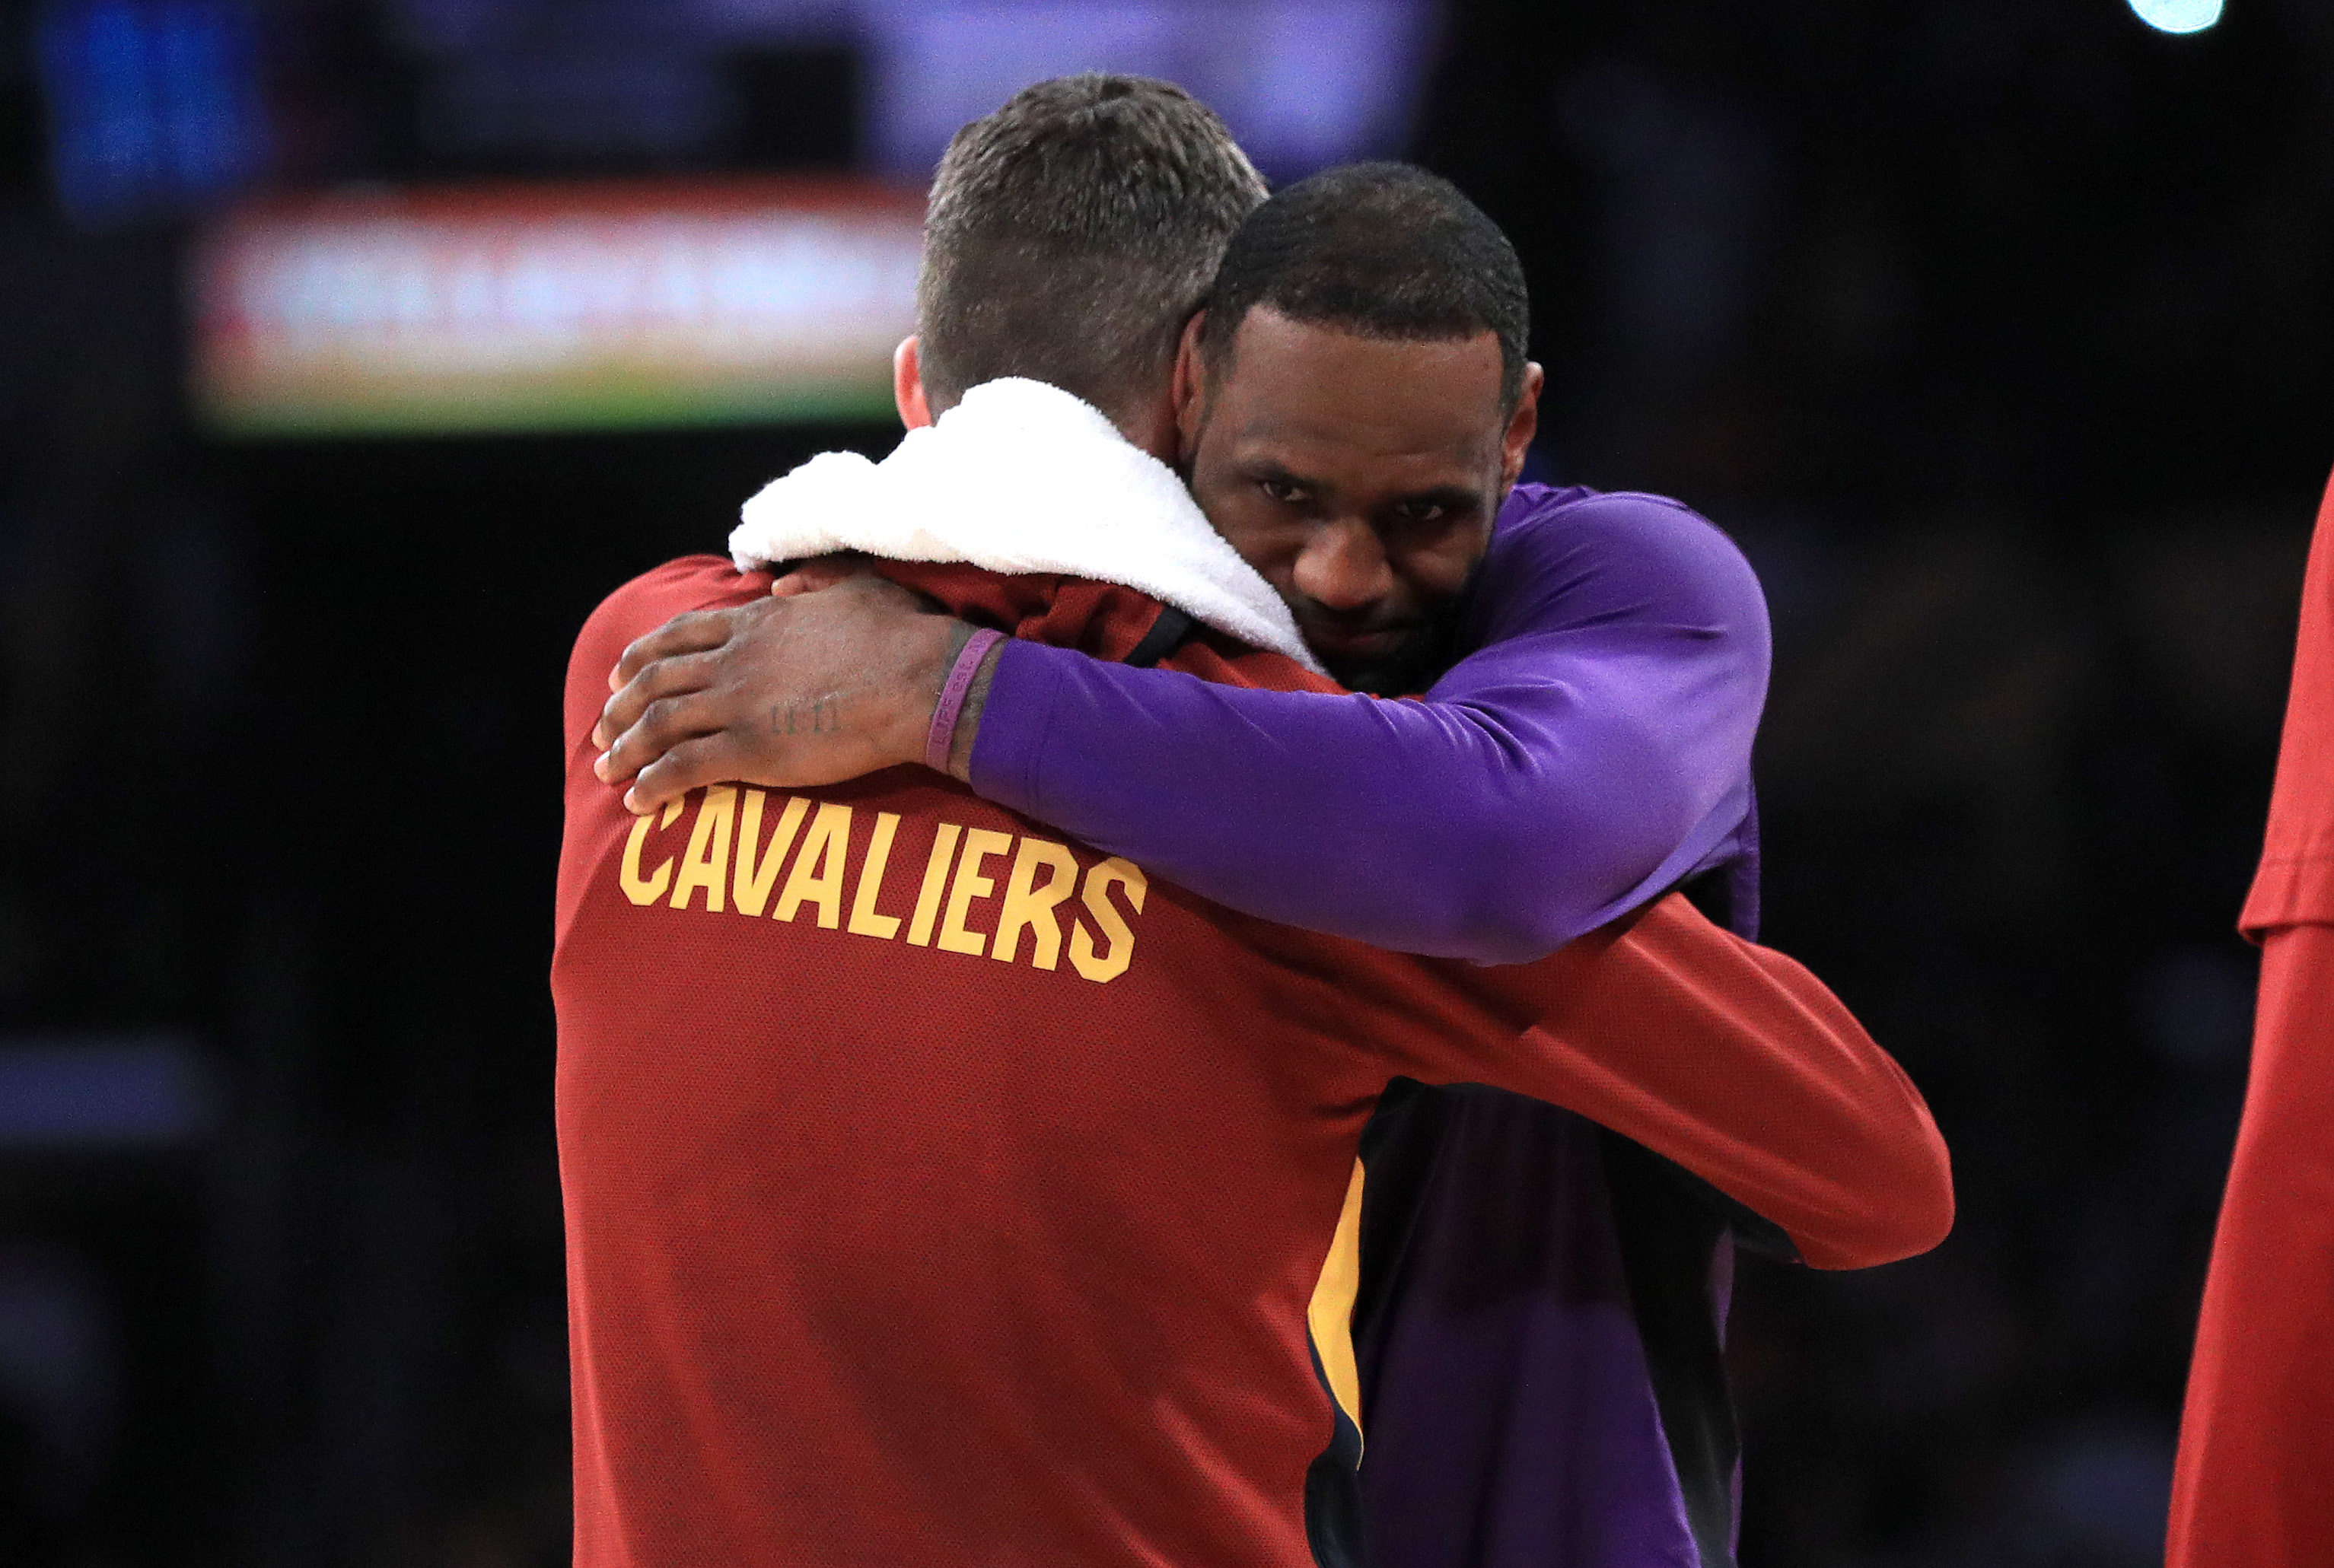 Kevin Love and LeBron James embrace after an NBA game between the Cleveland Cavaliers and Los Angeles Lakers in January 2022